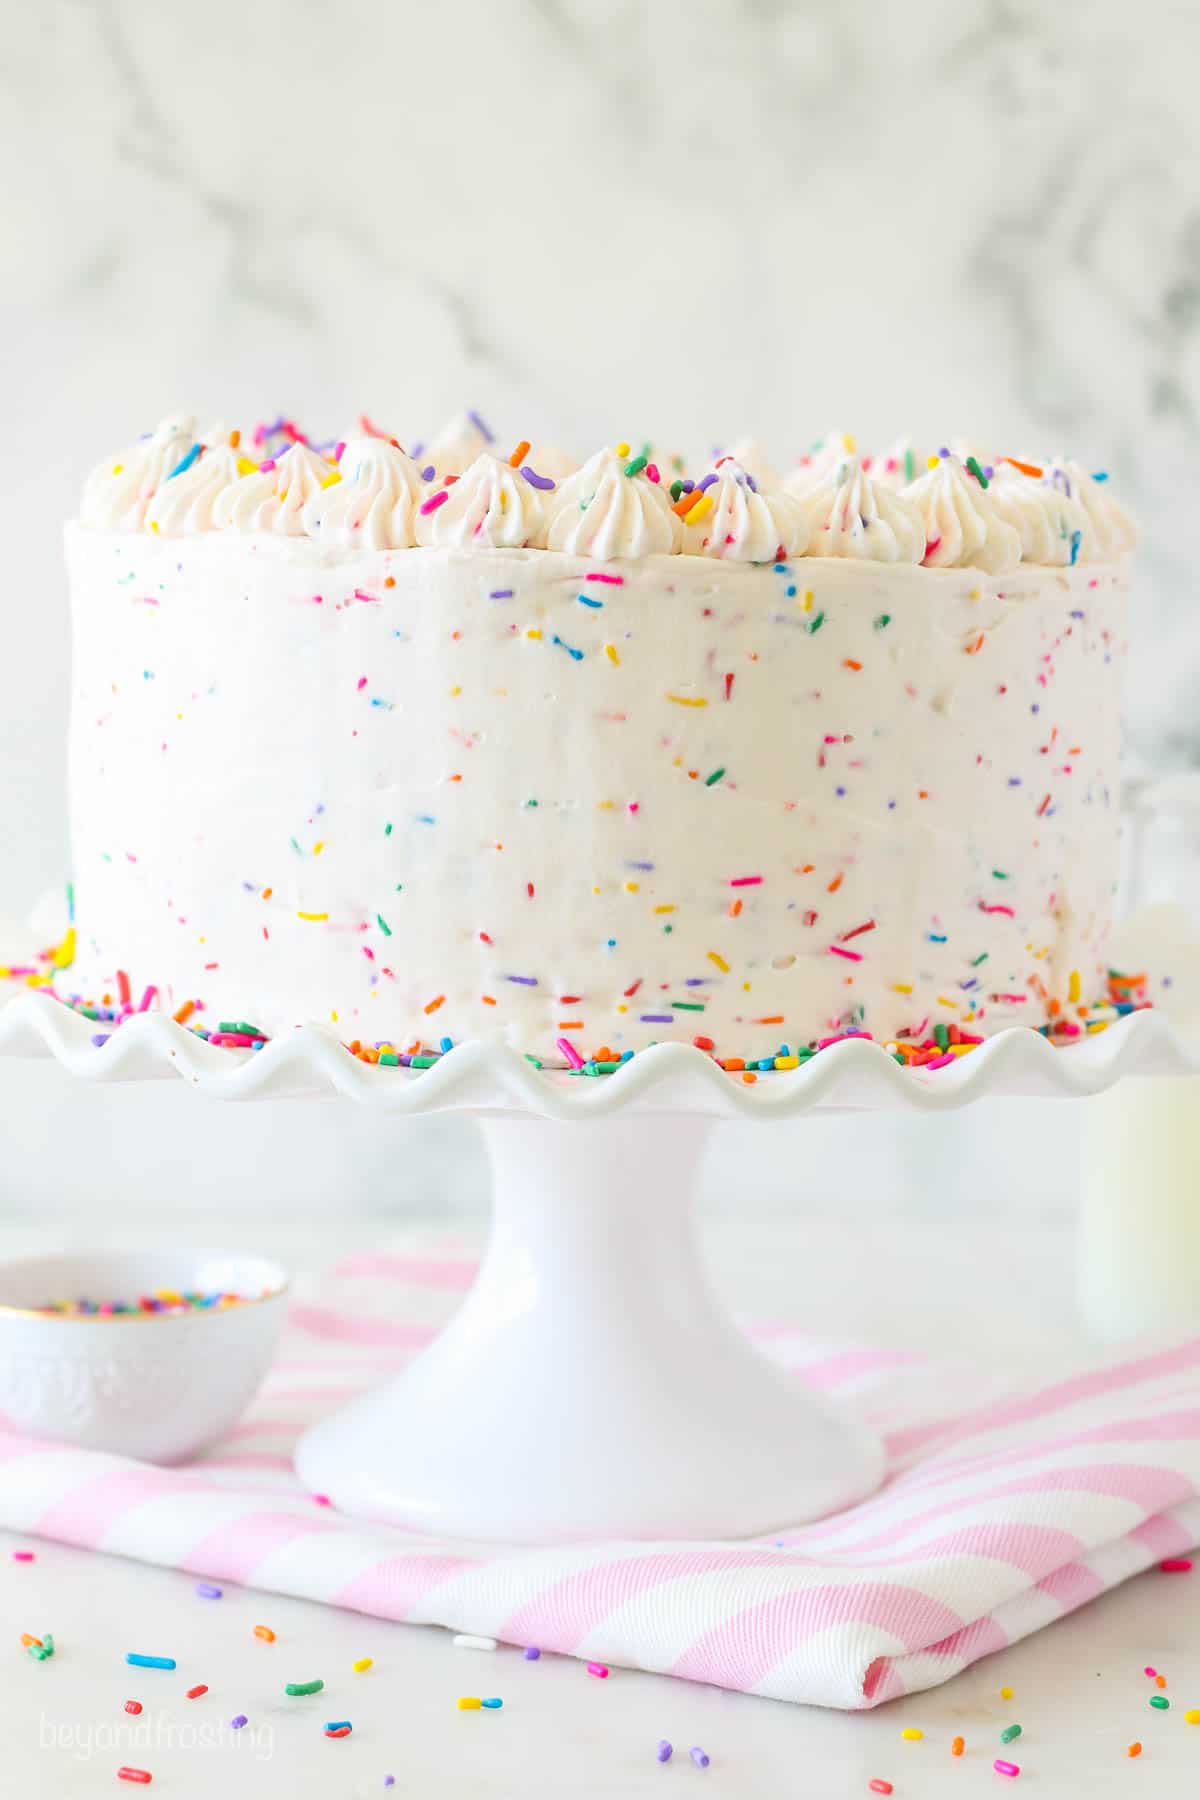 A cake decorated with sprinkles buttercream on a white cake plate with a pink striped napkin